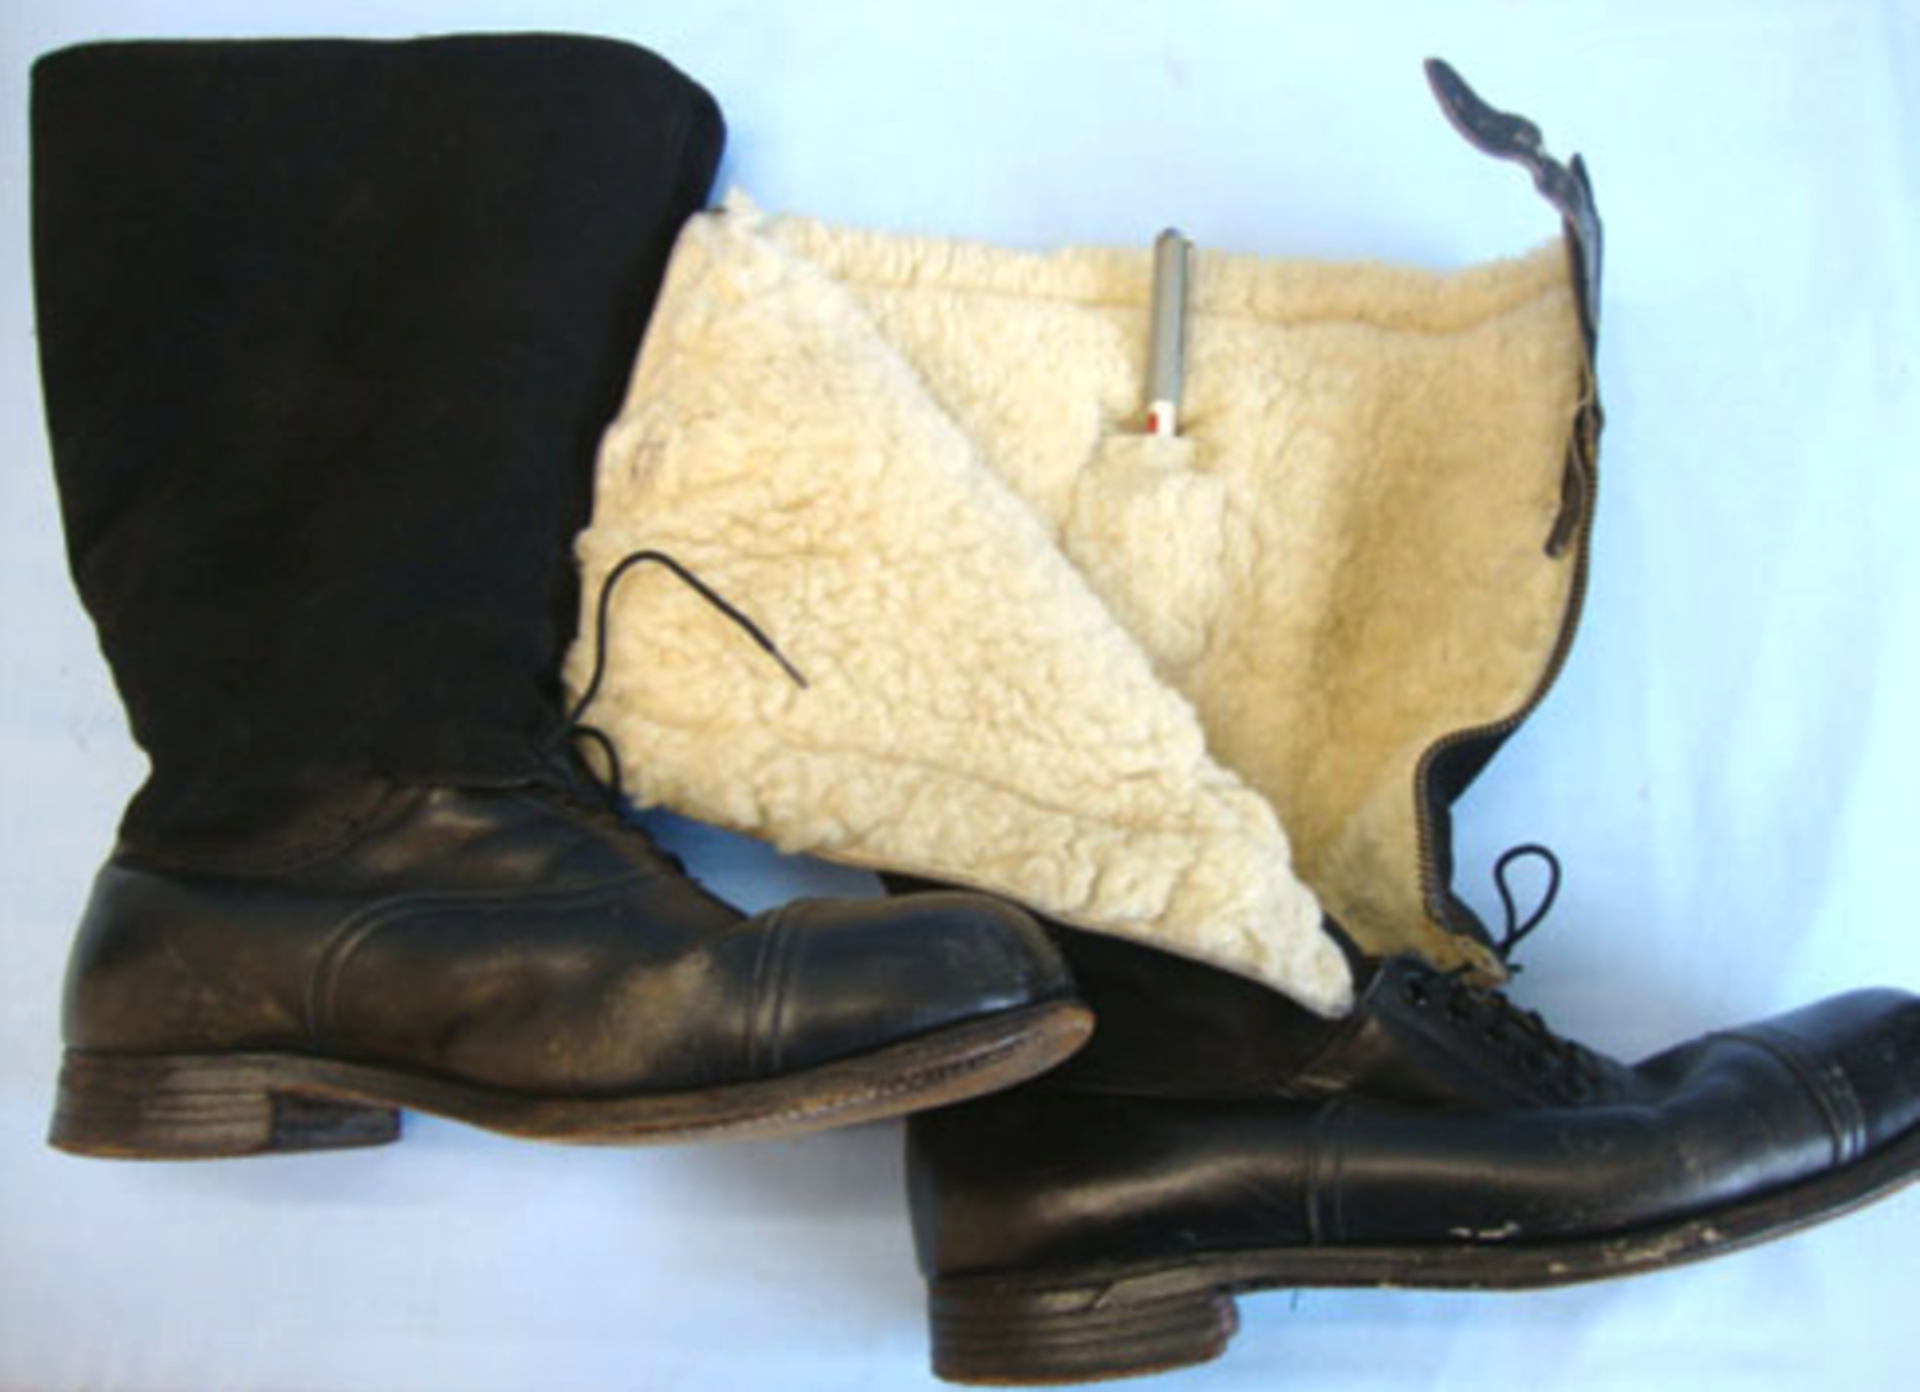 WW2 1943 Pattern Royal Air Force Pilot/Aircrew Fur Lined Escape Boots.   A pair of WW2 1943 Pattern, - Image 2 of 3